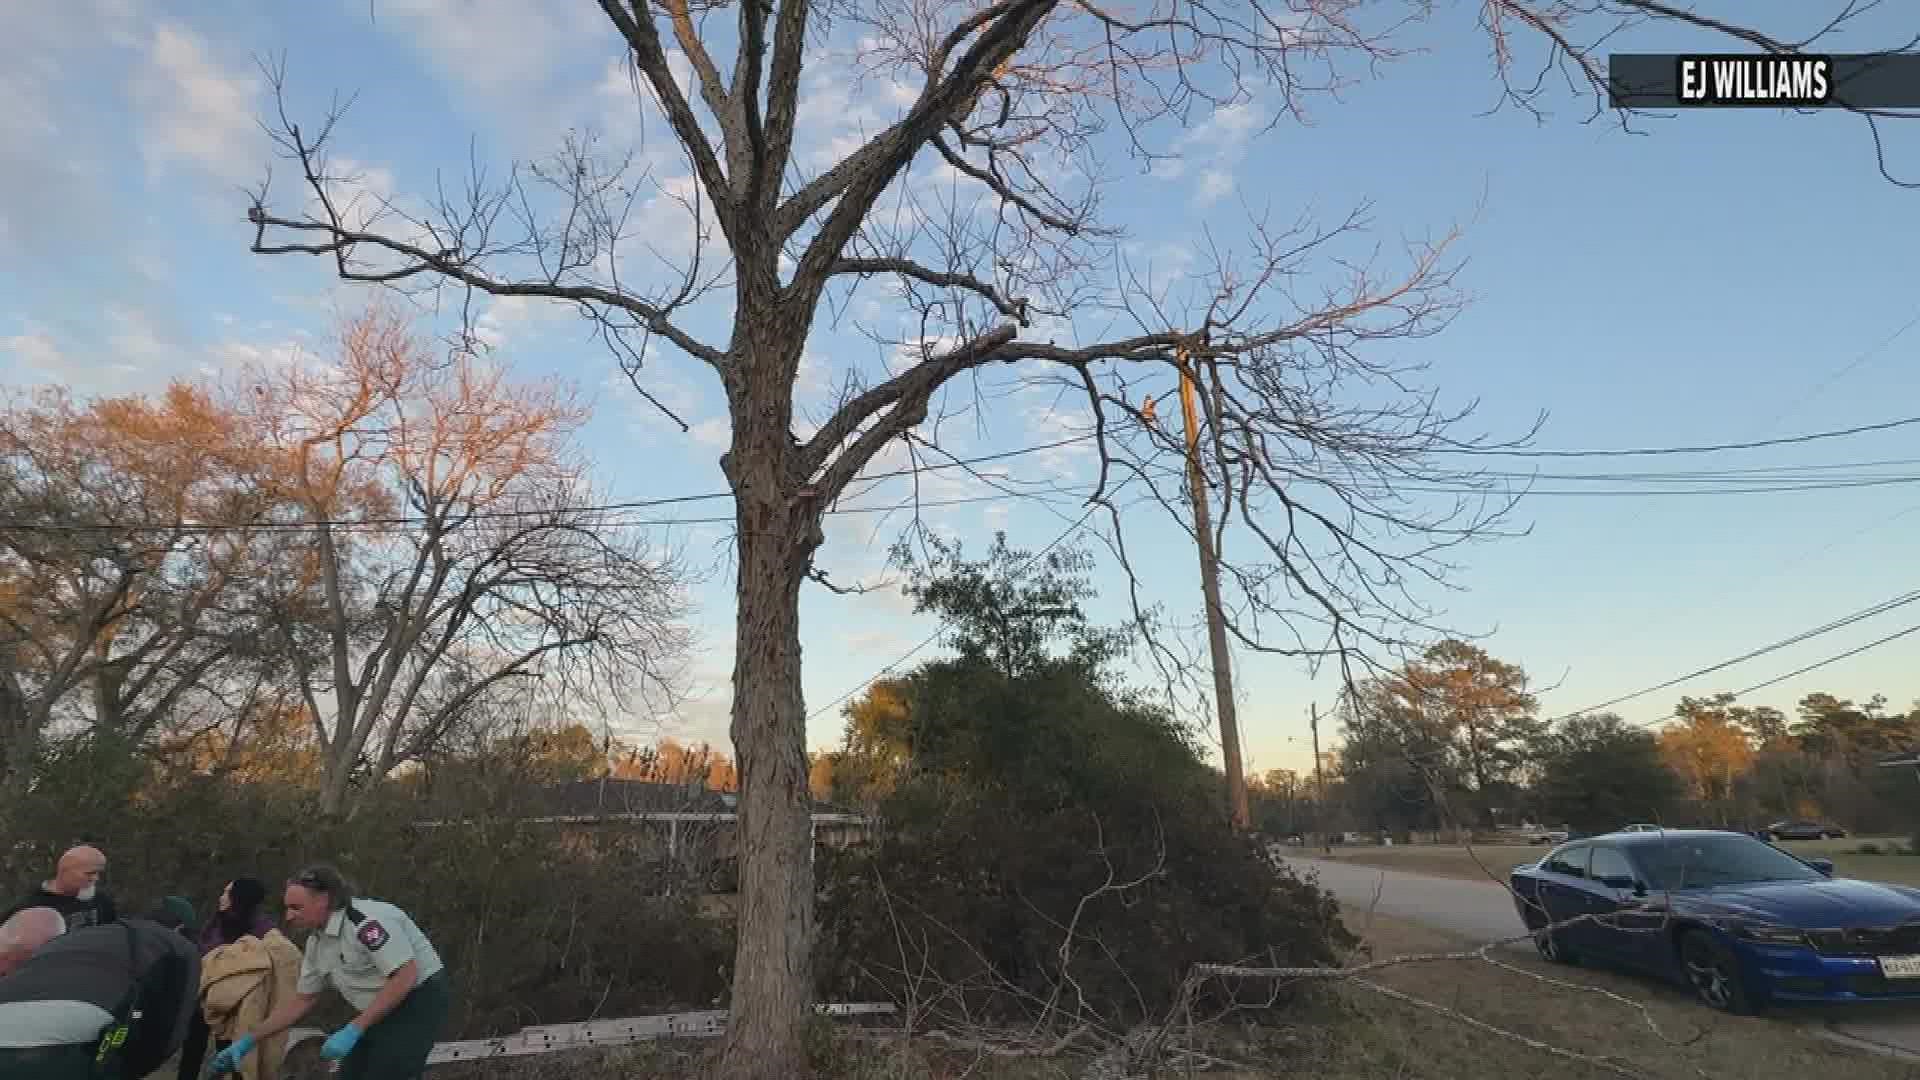 A man was cutting a tree when he fell about 30 feet and landed on his head.